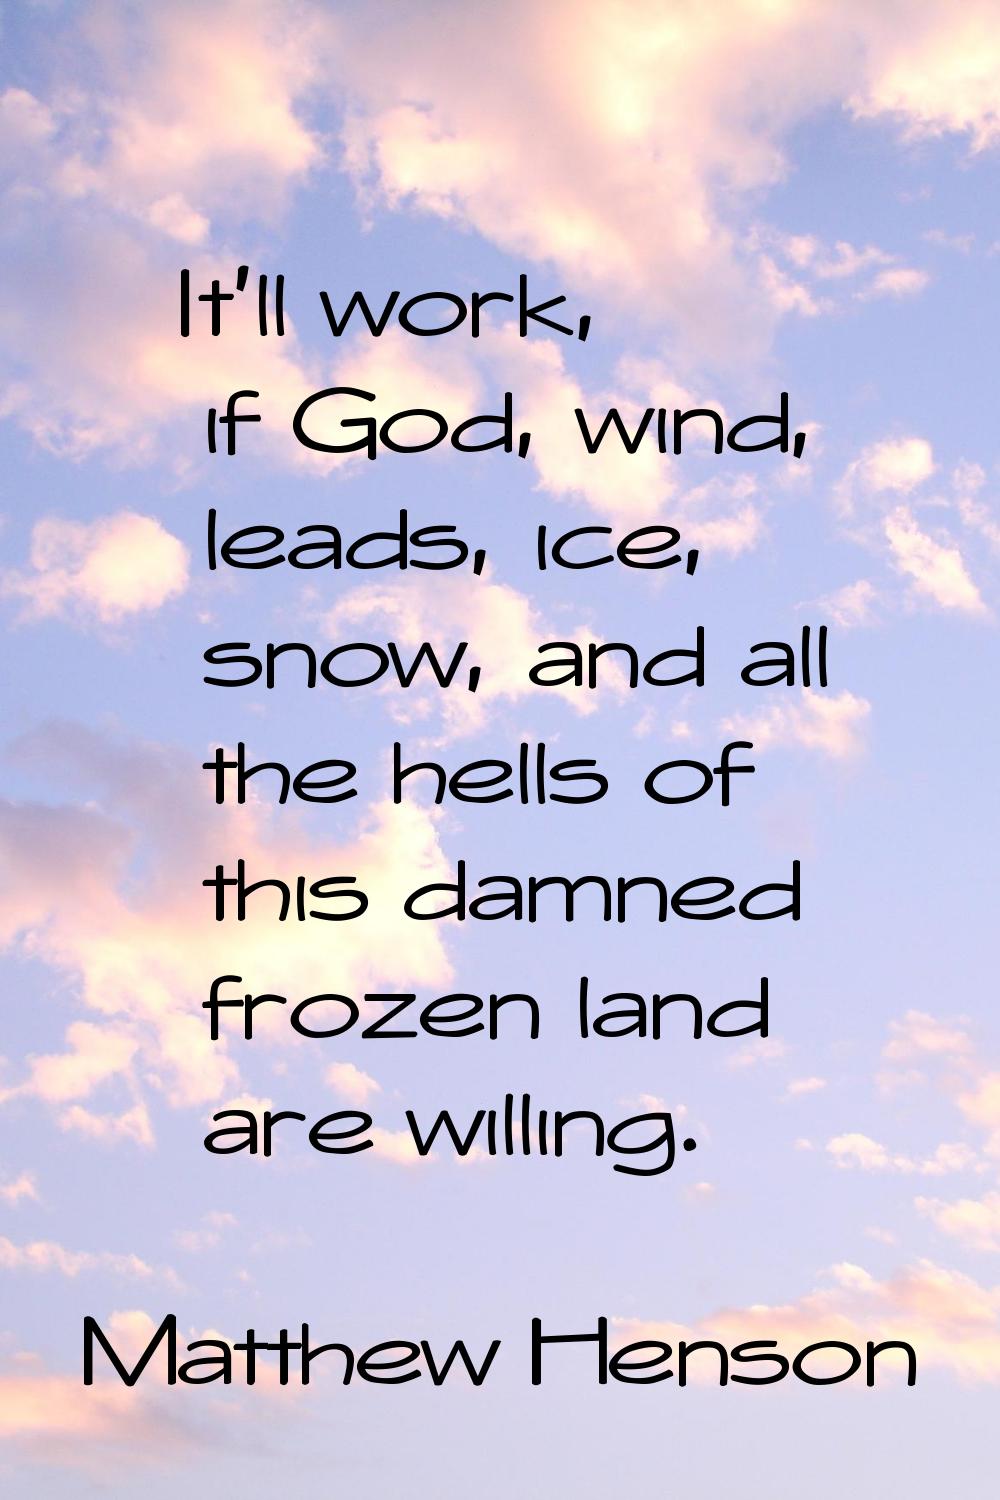 It'll work, if God, wind, leads, ice, snow, and all the hells of this damned frozen land are willin